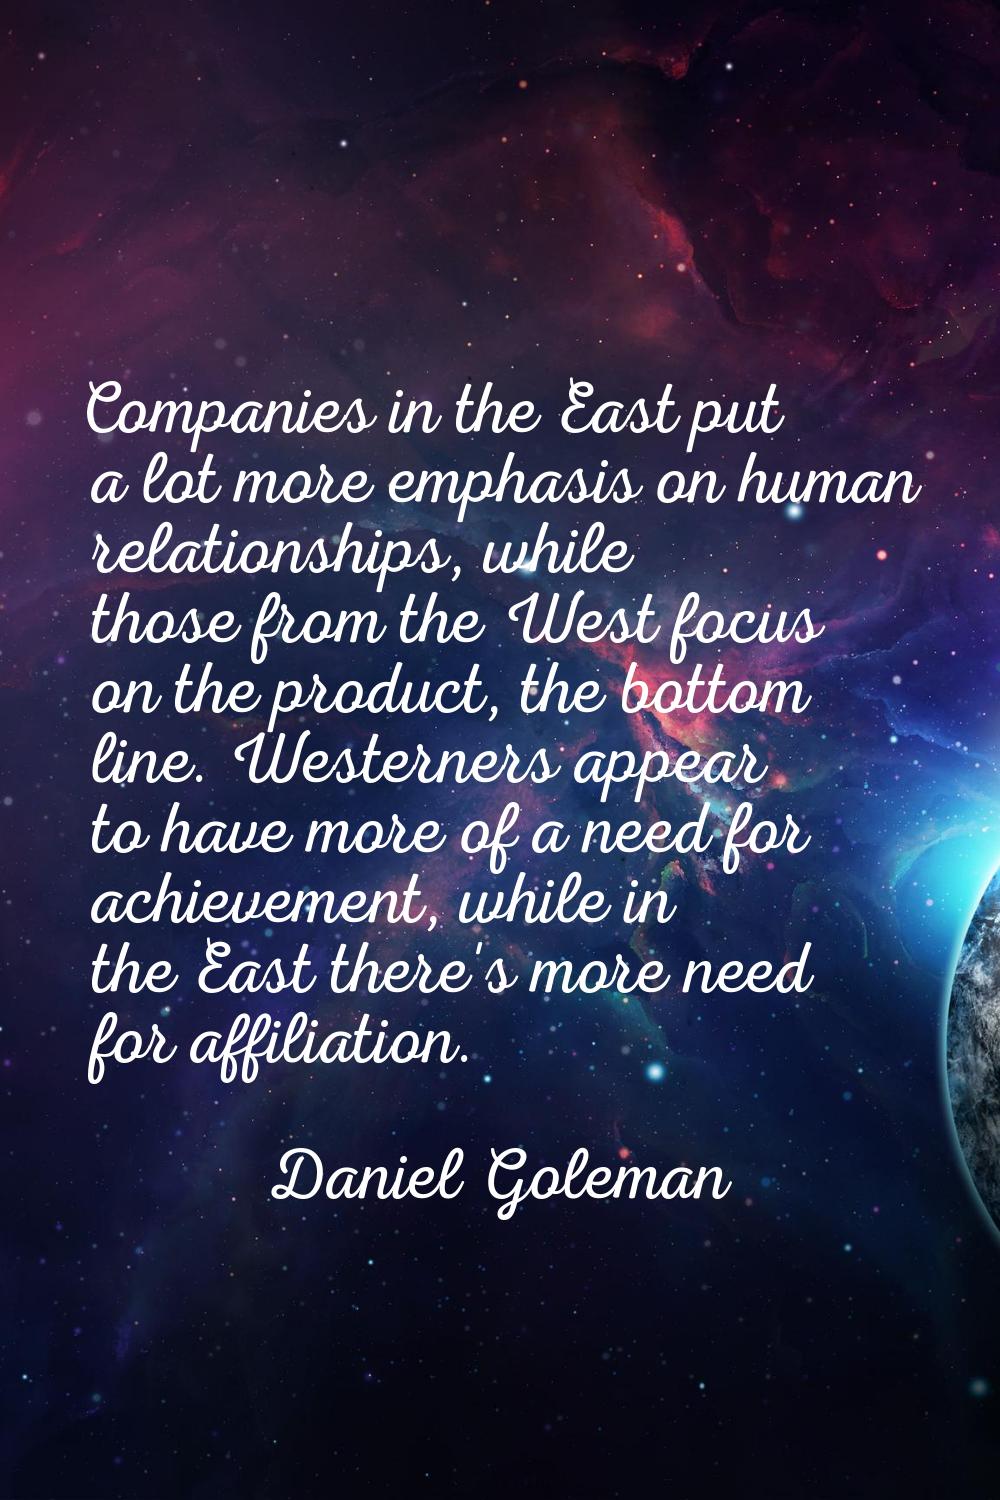 Companies in the East put a lot more emphasis on human relationships, while those from the West foc